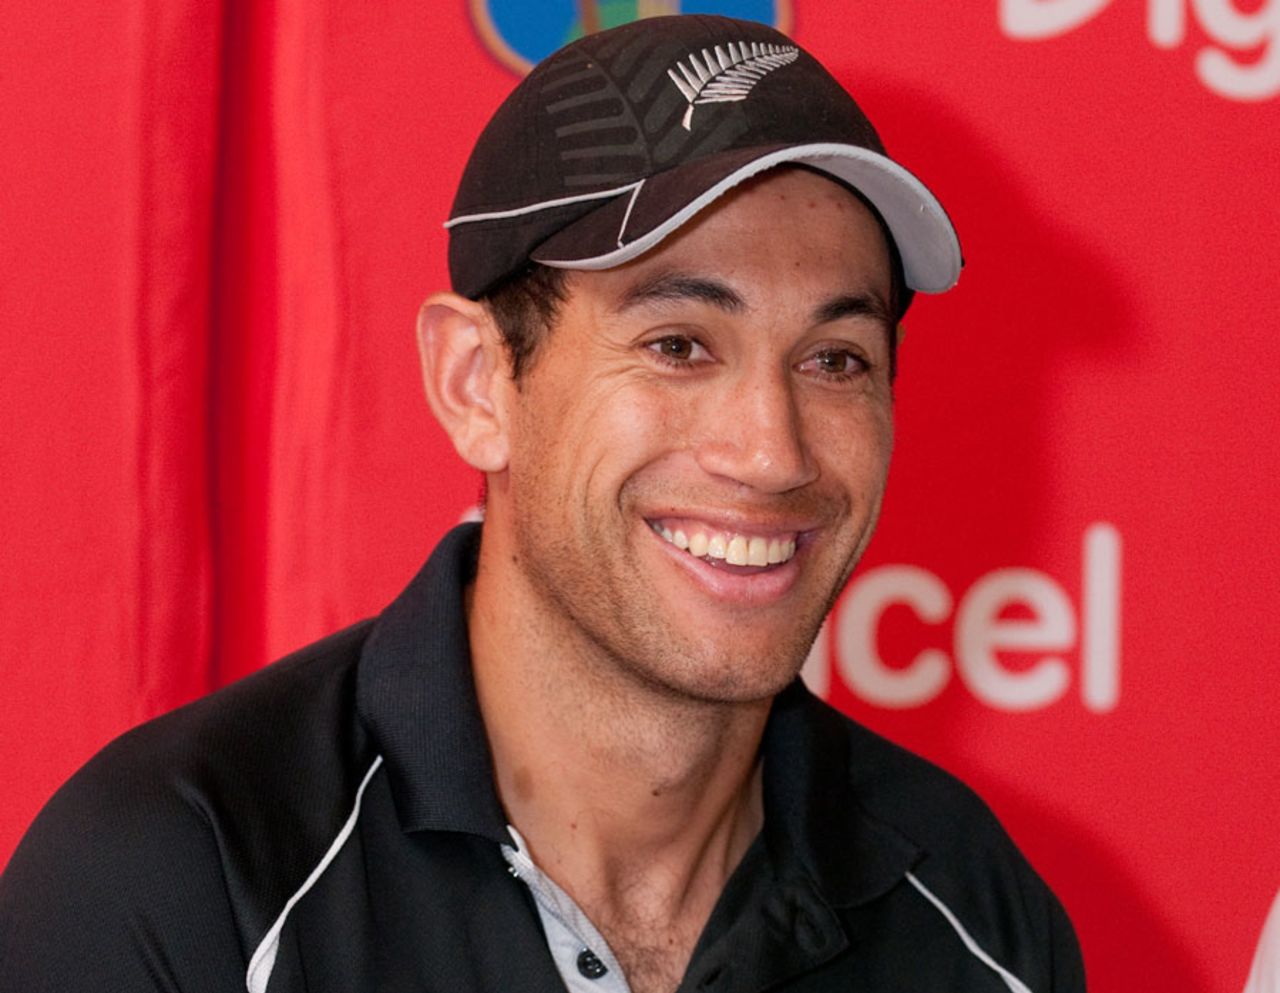 New Zealand captain Ross Taylor smiles during a press conference ahead of the first Test, Antigua, July 23, 2012